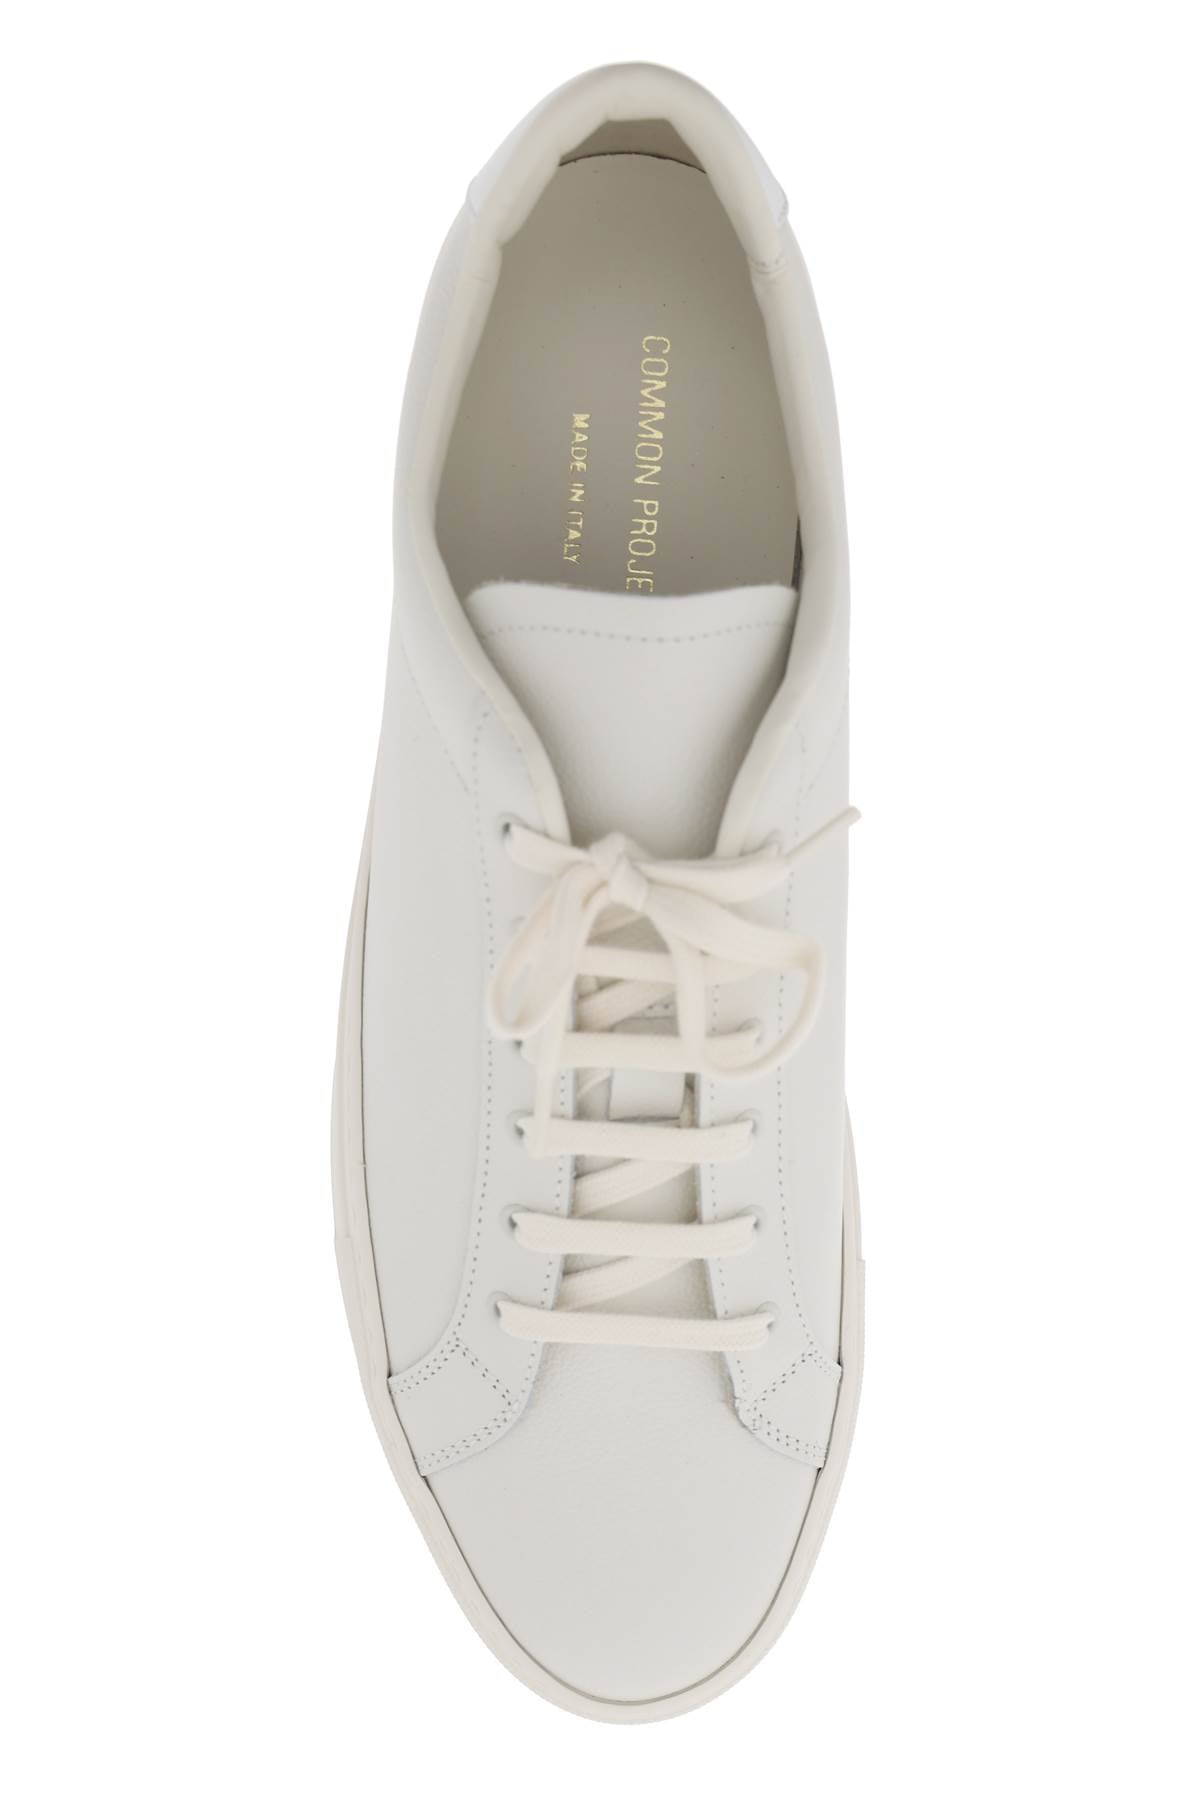 Shop Common Projects Sneakers Retro Low